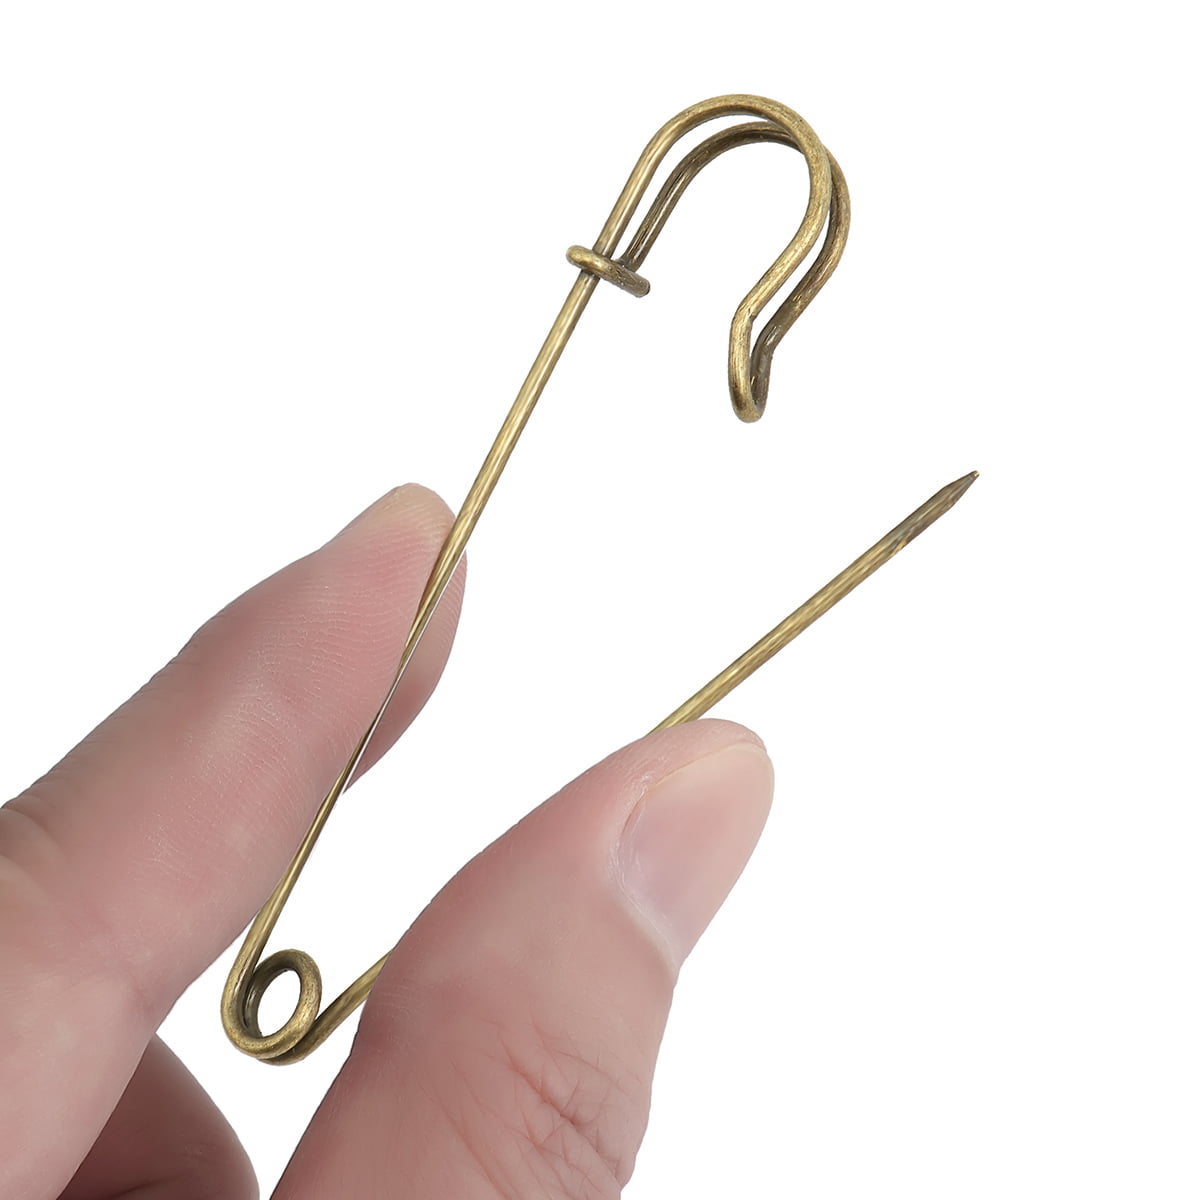 Gold Large Safety Pins Bulk Size 3 - 2 inch 1440 Pieces